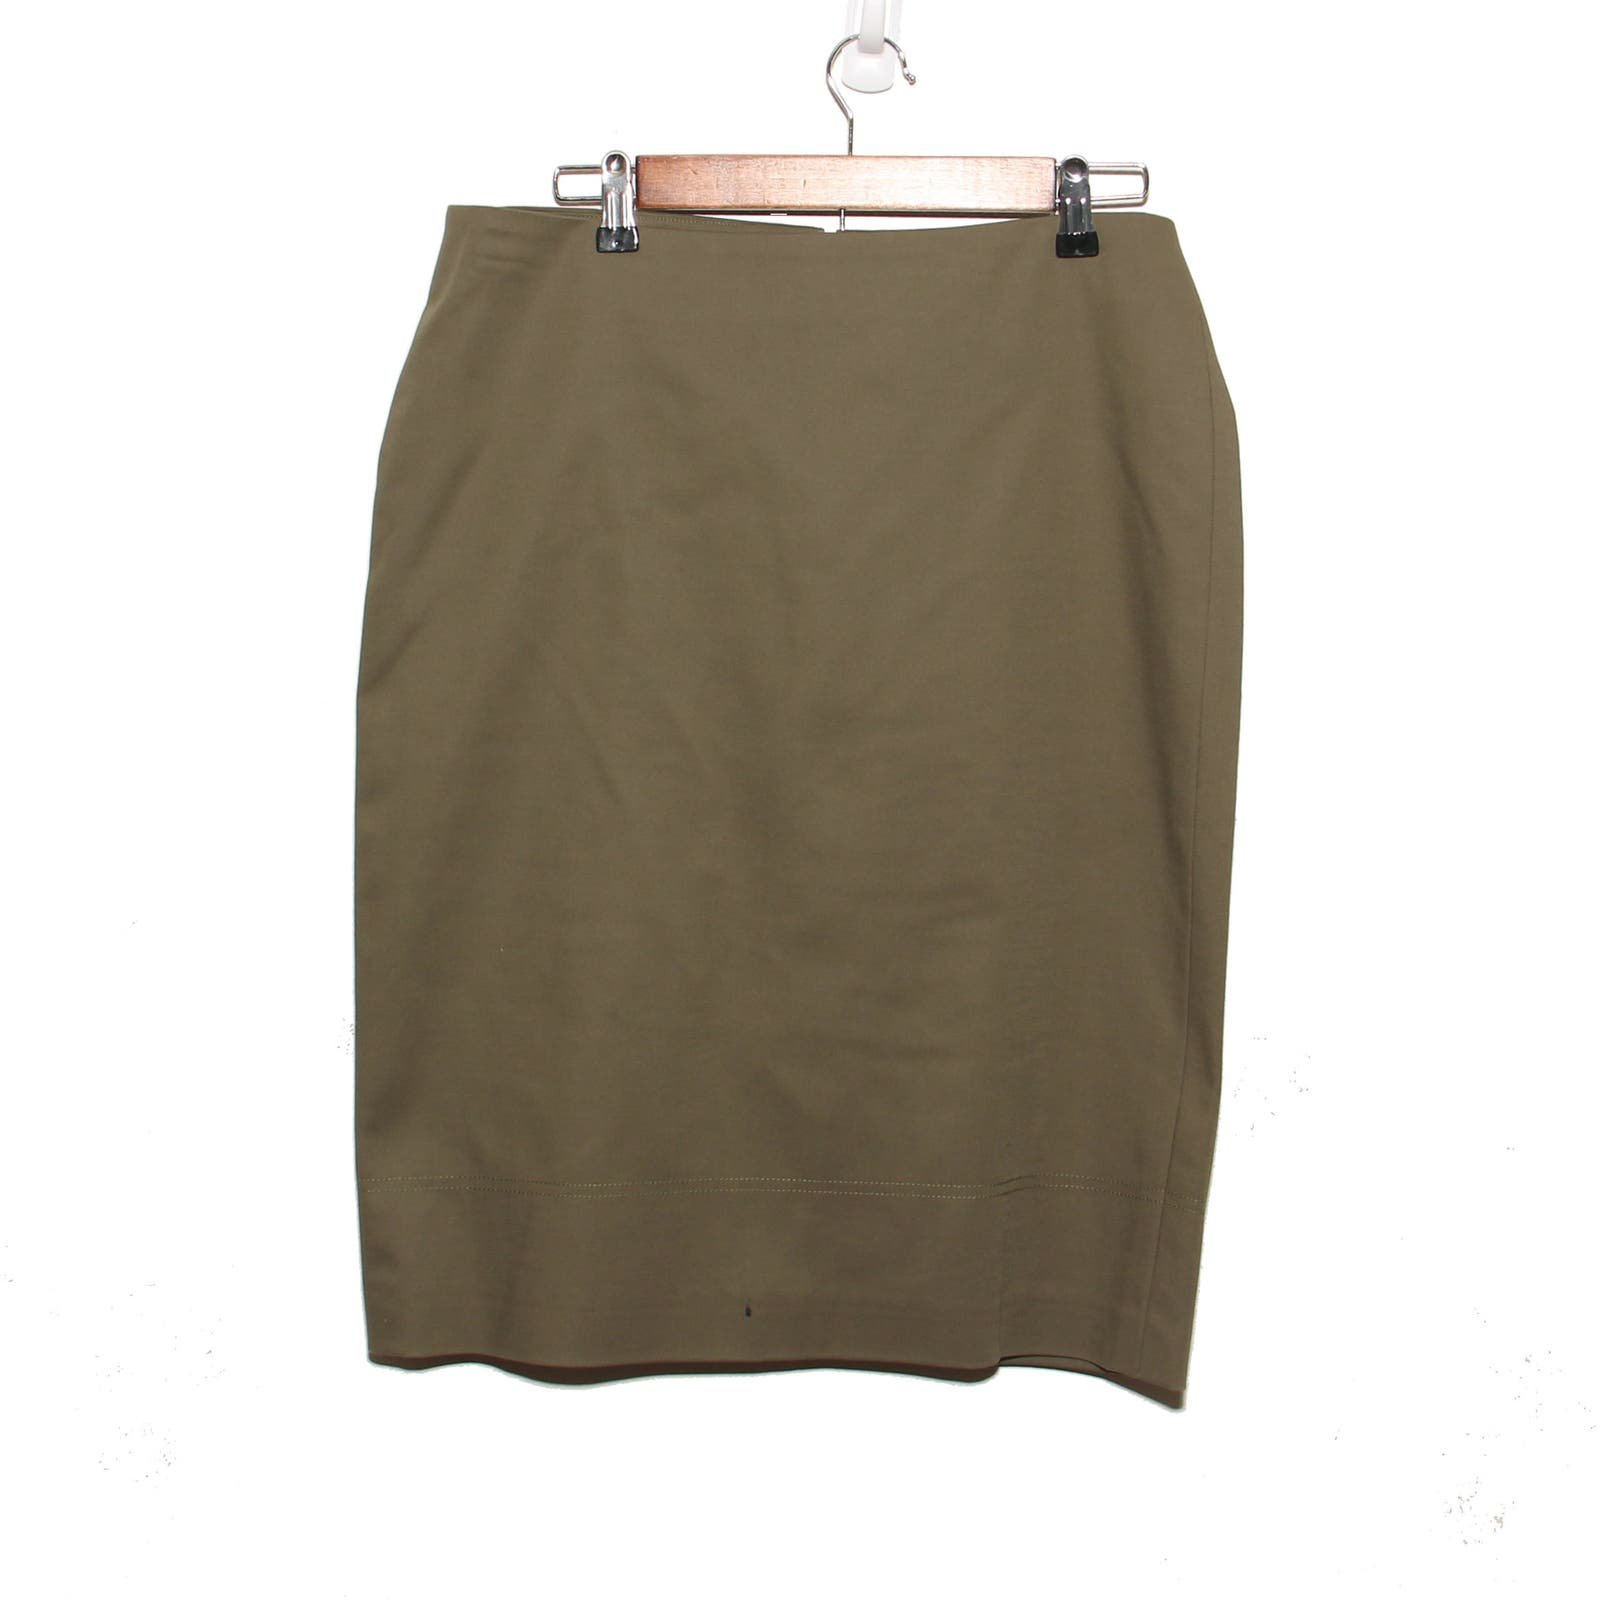 the Lowest price Doncaster Pencil Skirt Size 10 Cotton 